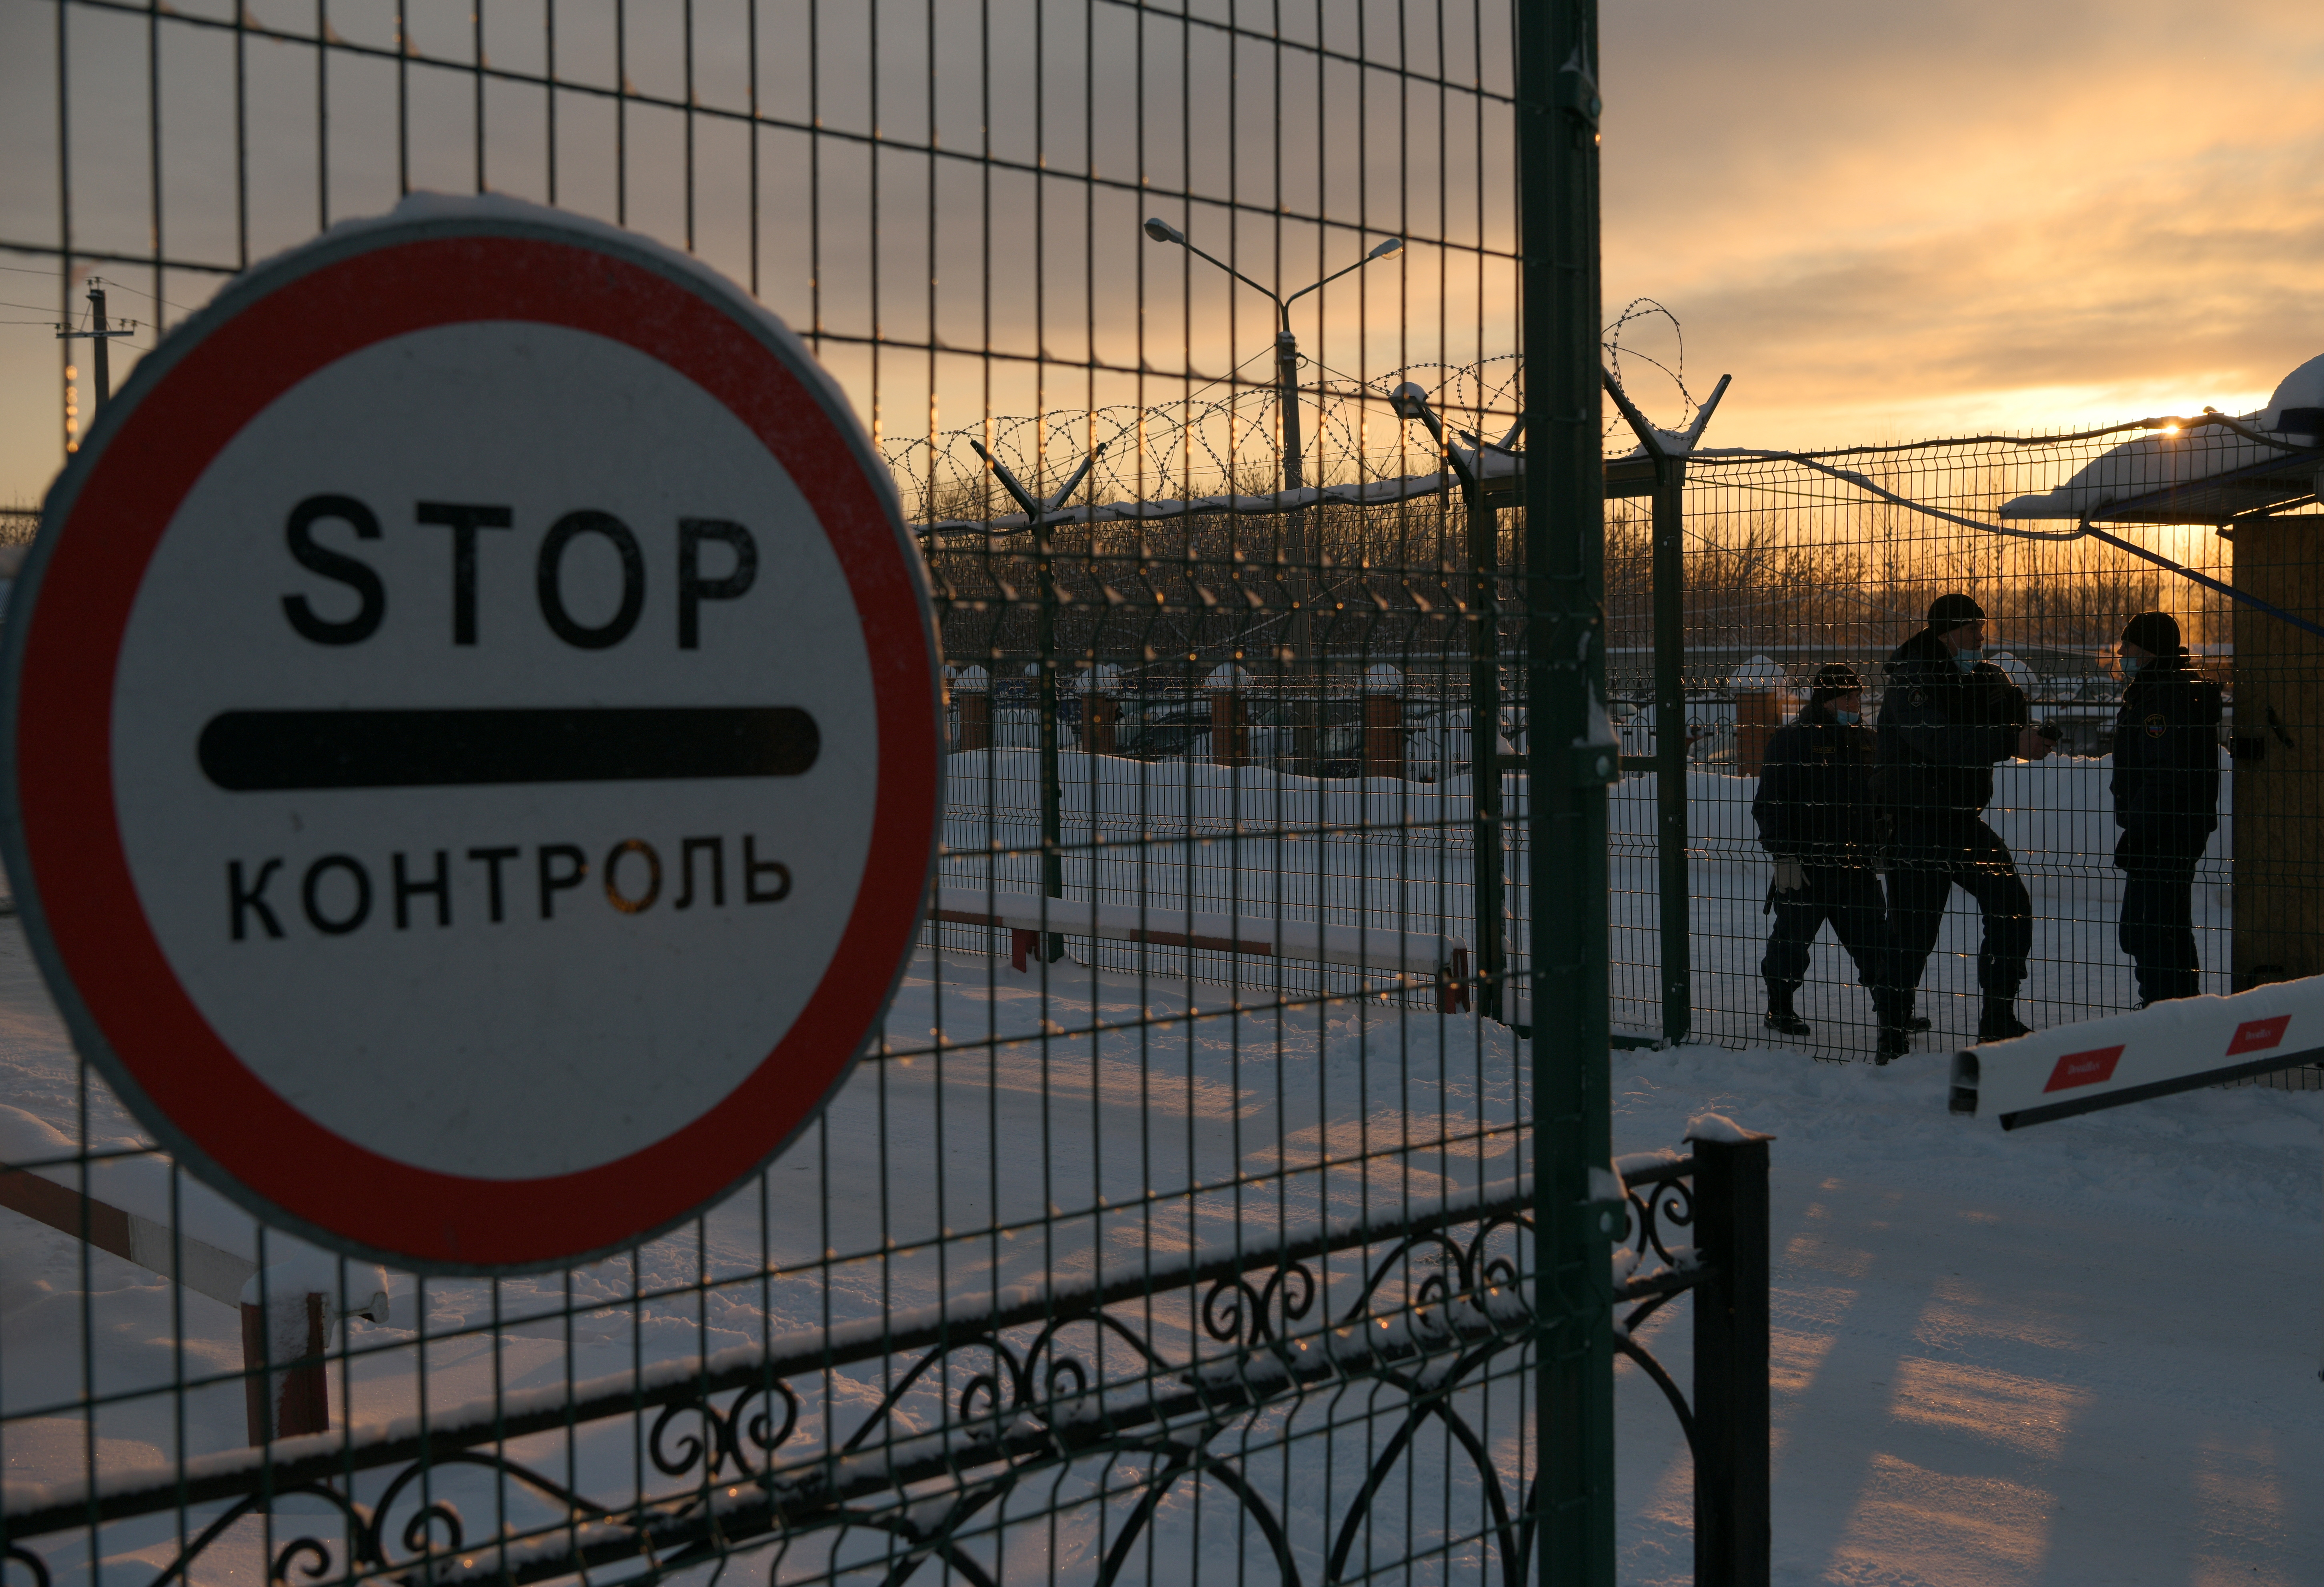 A stop sign is seen at the entrance to the mining territory following an accident at the Listvyazhnaya coal mine in the Kemerovo region, Russia, 26 November 2021. REUTERS / Alexander Patrin